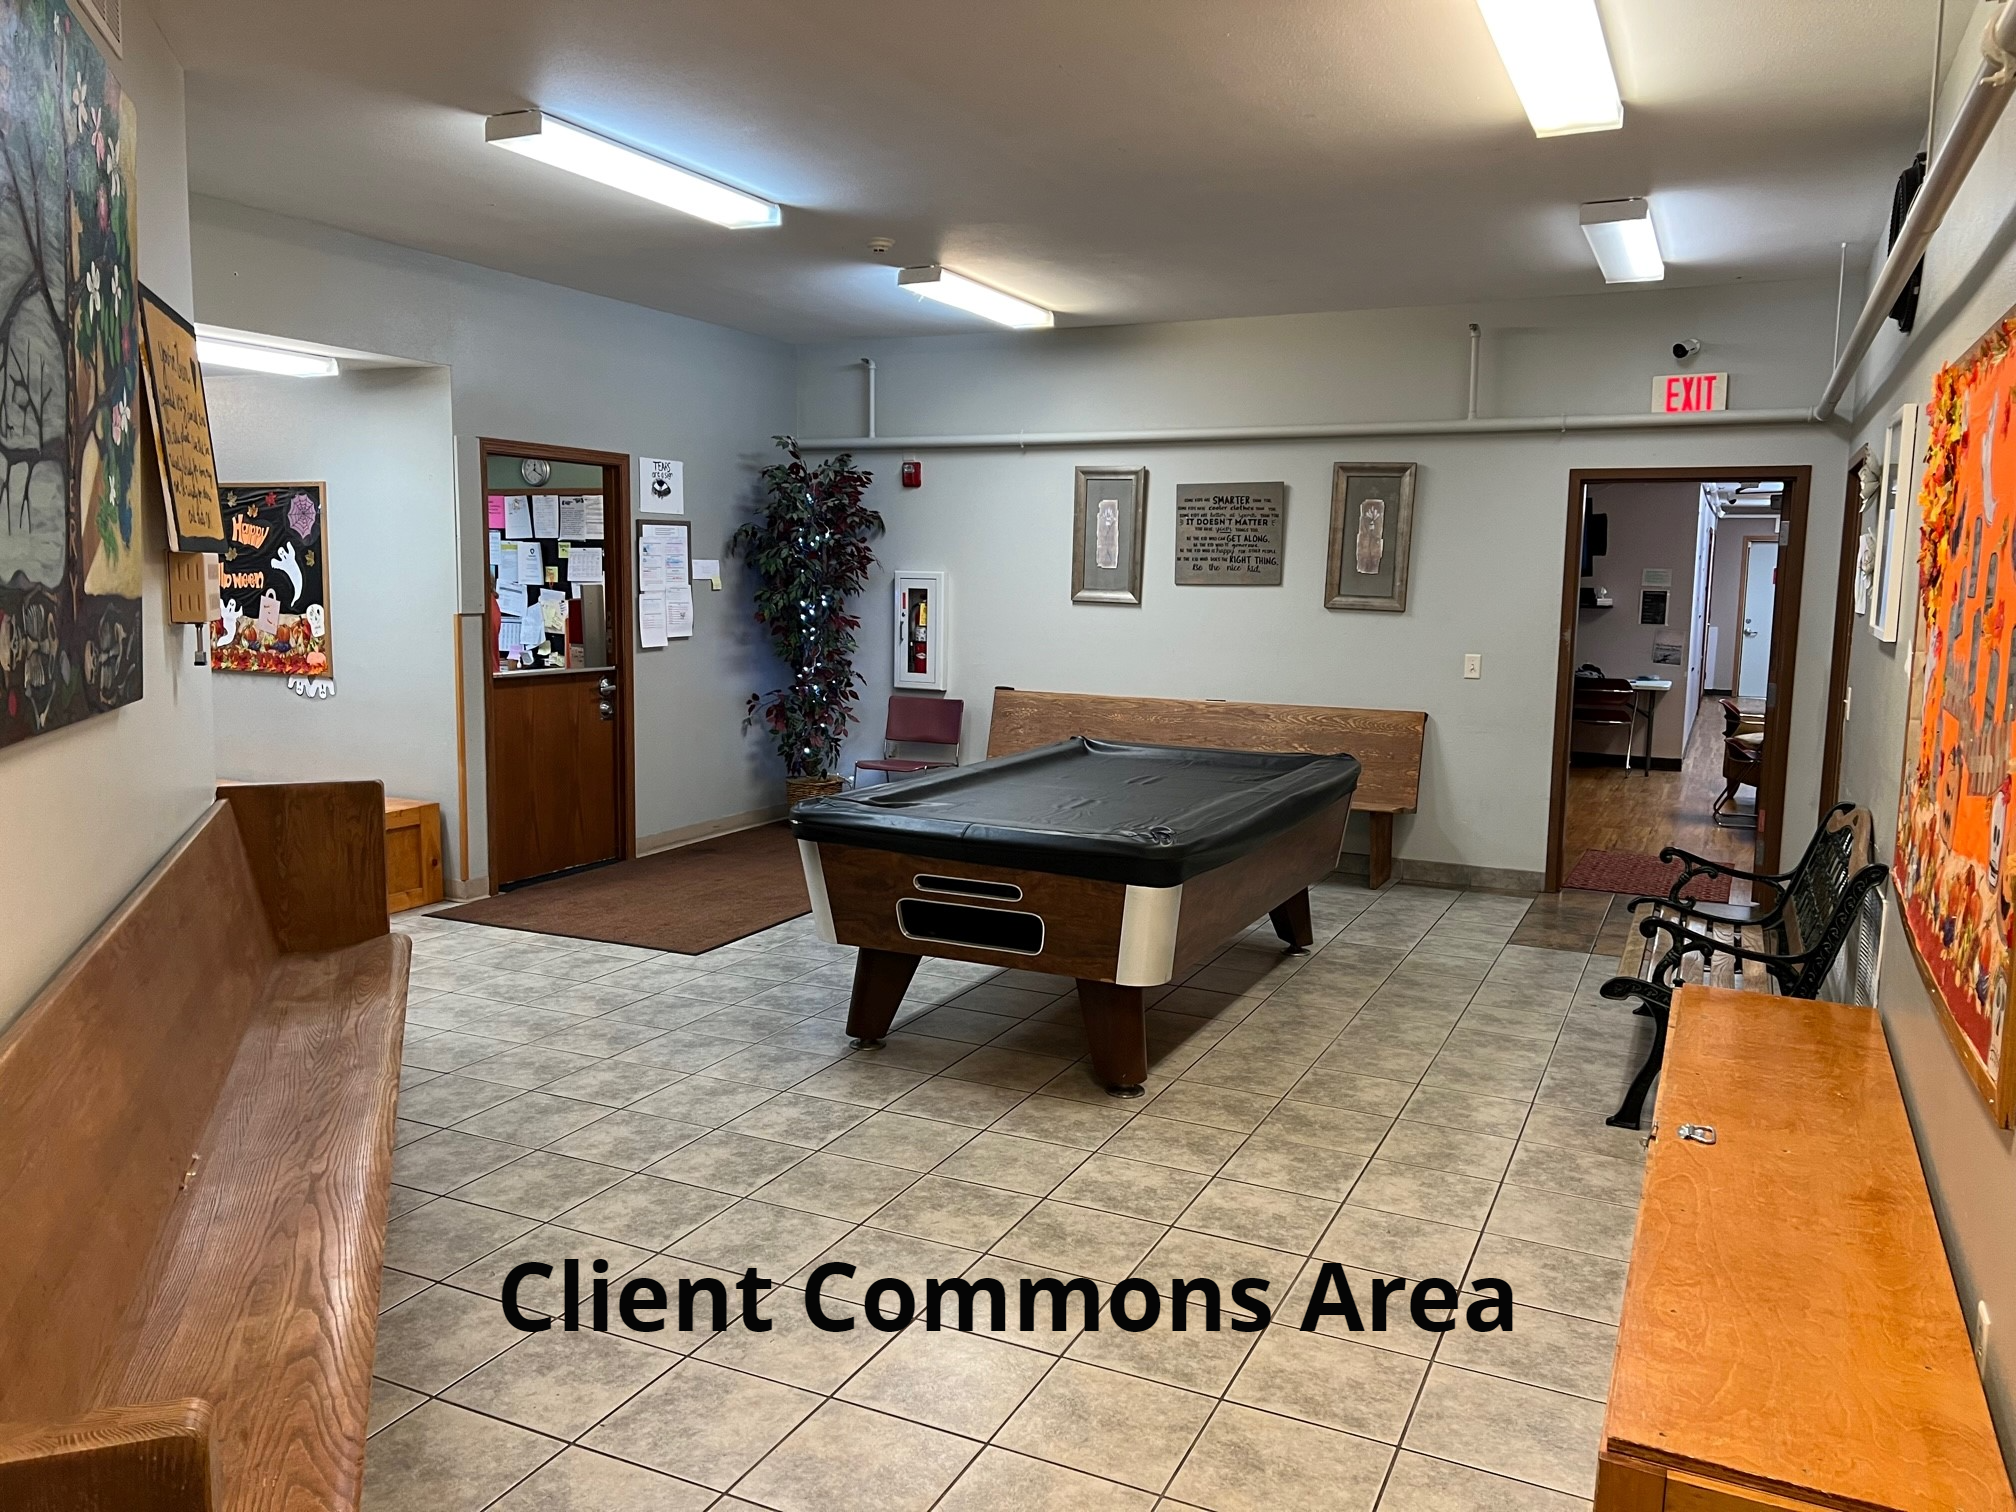 Client Commons Area